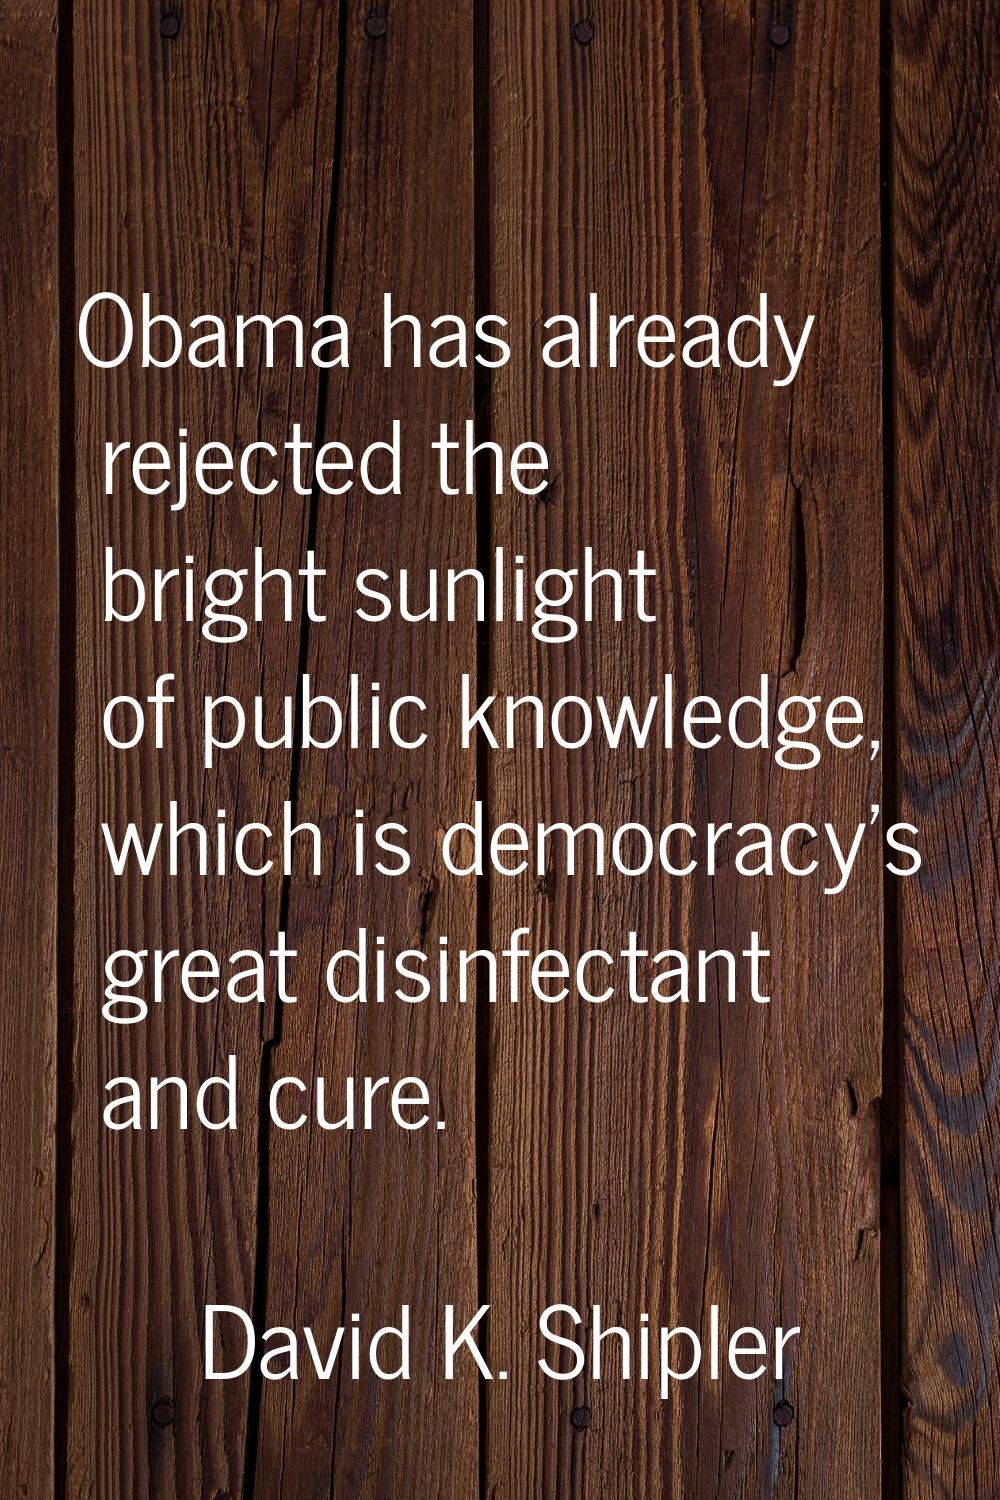 Obama has already rejected the bright sunlight of public knowledge, which is democracy's great disi